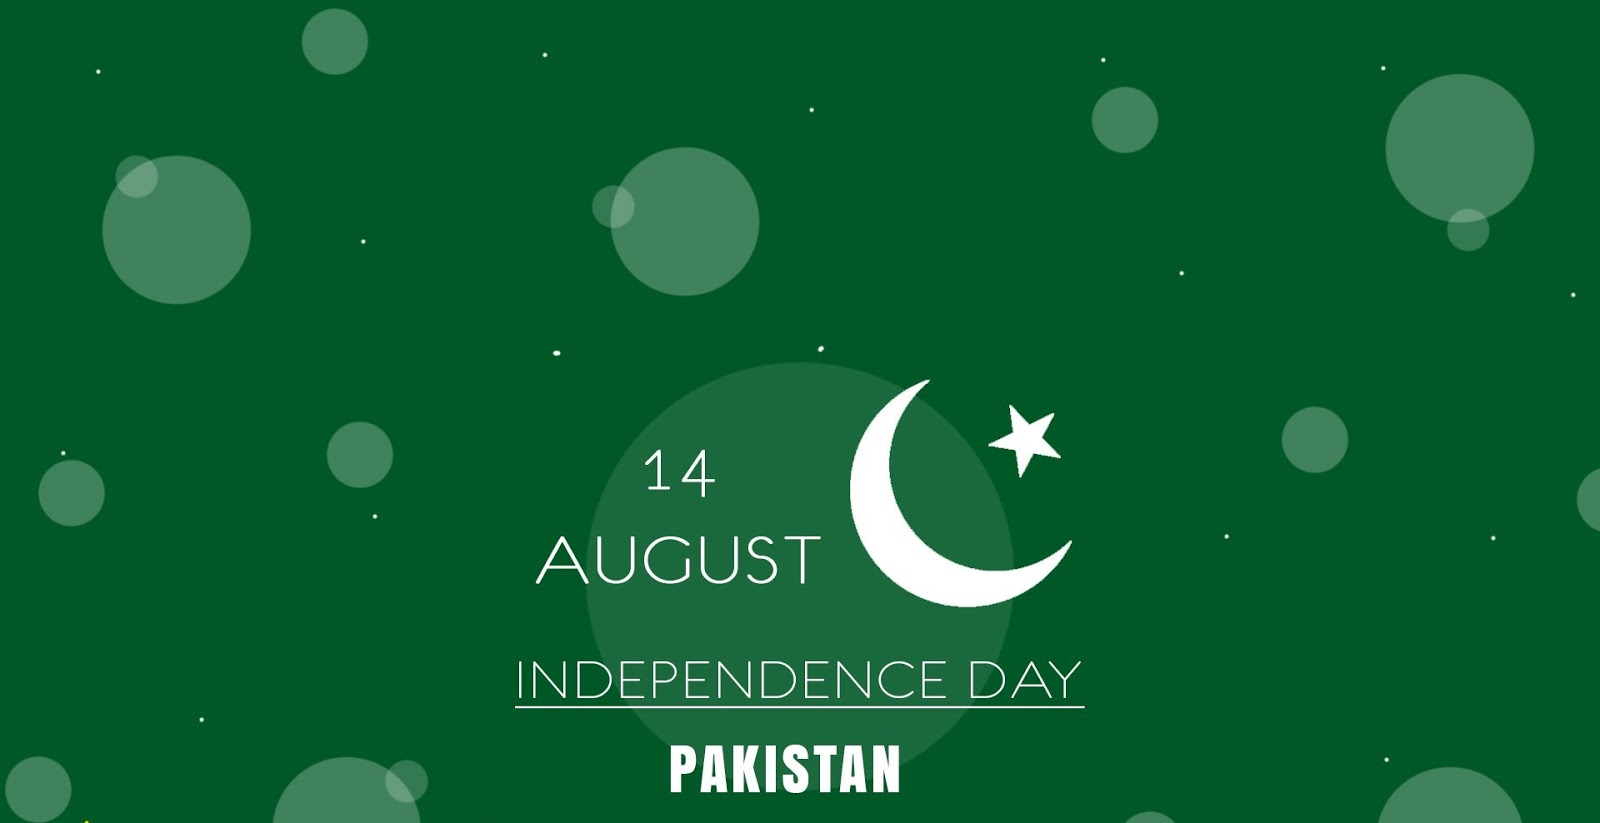 Happy Pakistan Independence Day Wallpapers - 14 August Pics Hd , HD Wallpaper & Backgrounds